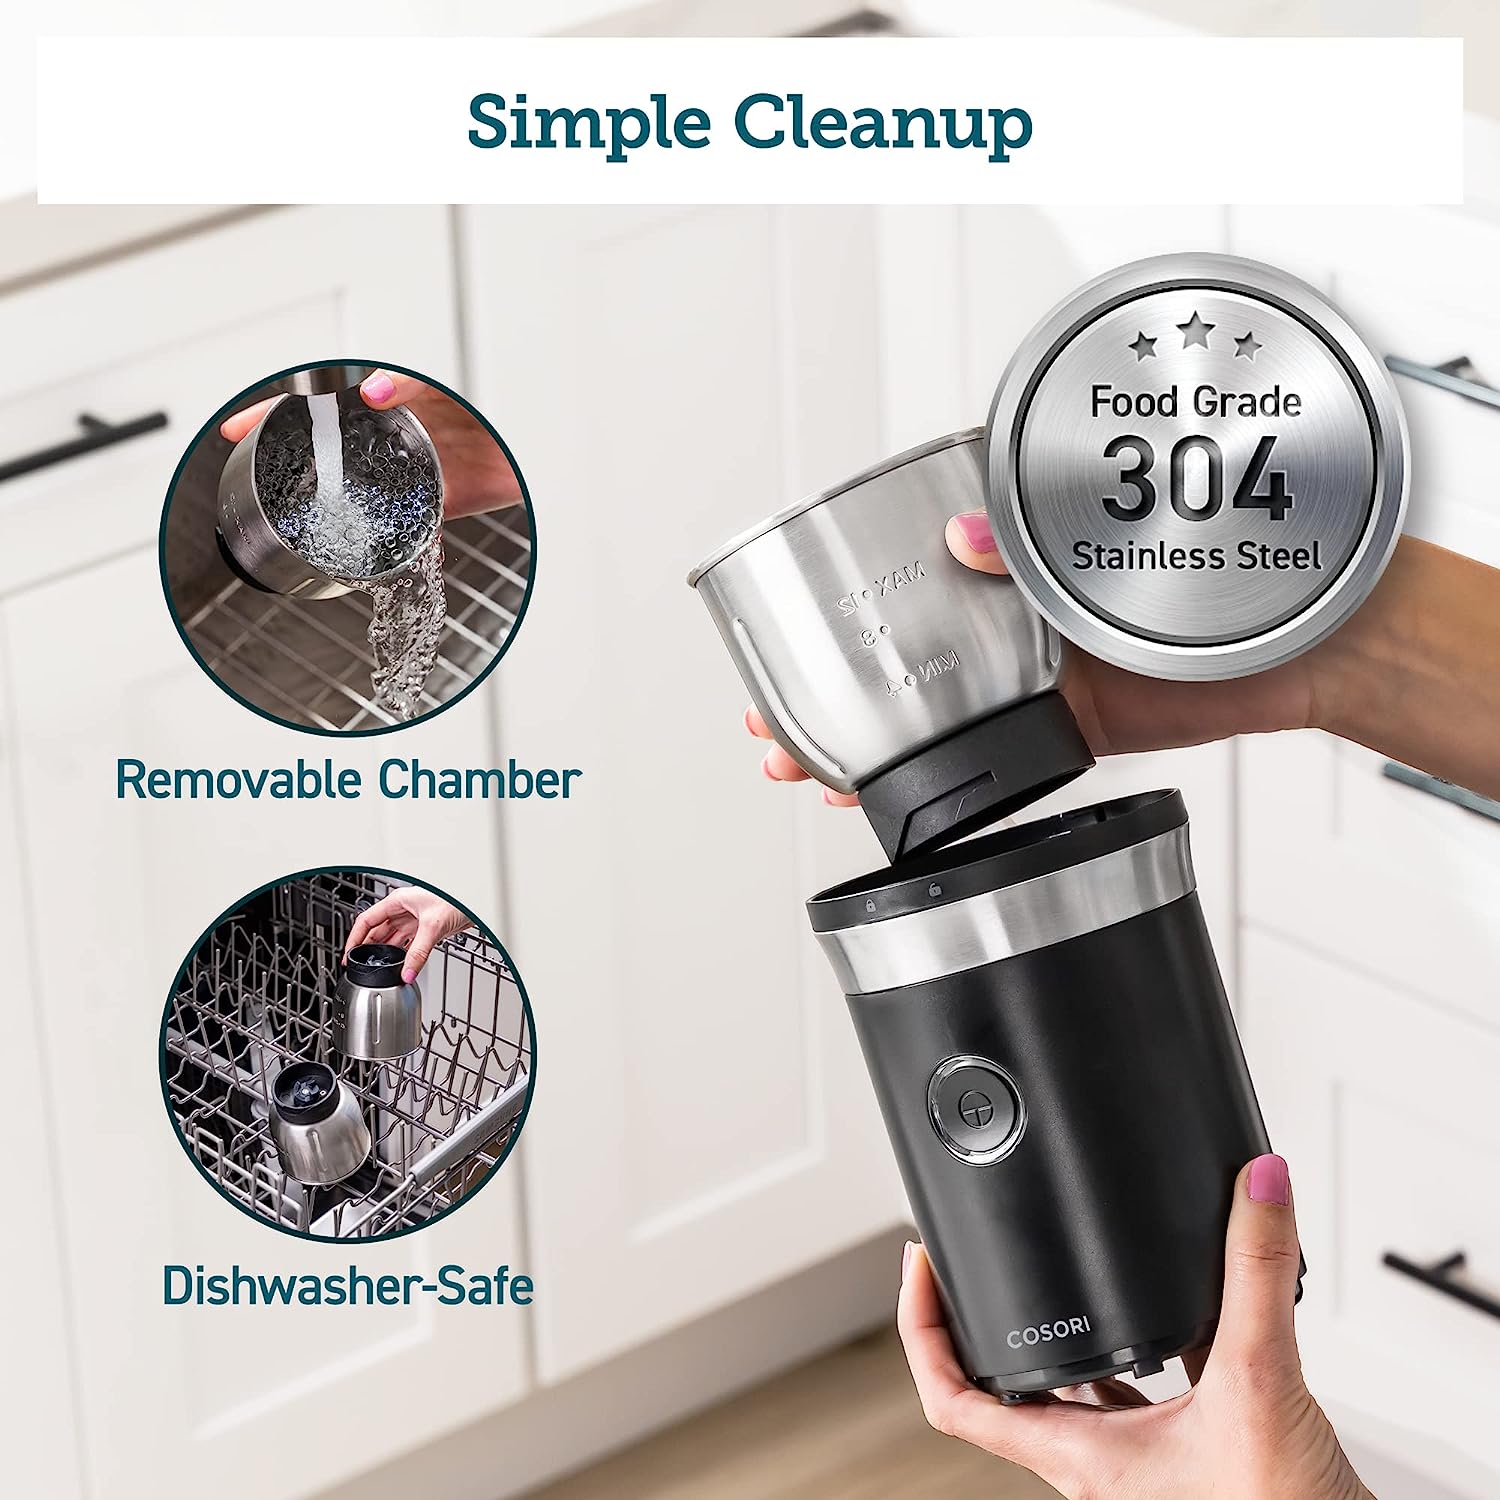 https://bigbigmart.com/wp-content/uploads/2023/10/COSORI-Electric-Coffee-Grinders-for-Spices-Seeds-Herbs-and-Coffee-Beans-Spice-Blender-and-Espresso-Grinder-Wet-and-Dry-Grinder-Included-2-Removable-Stainless-Steel-Bowls-Black5.jpg